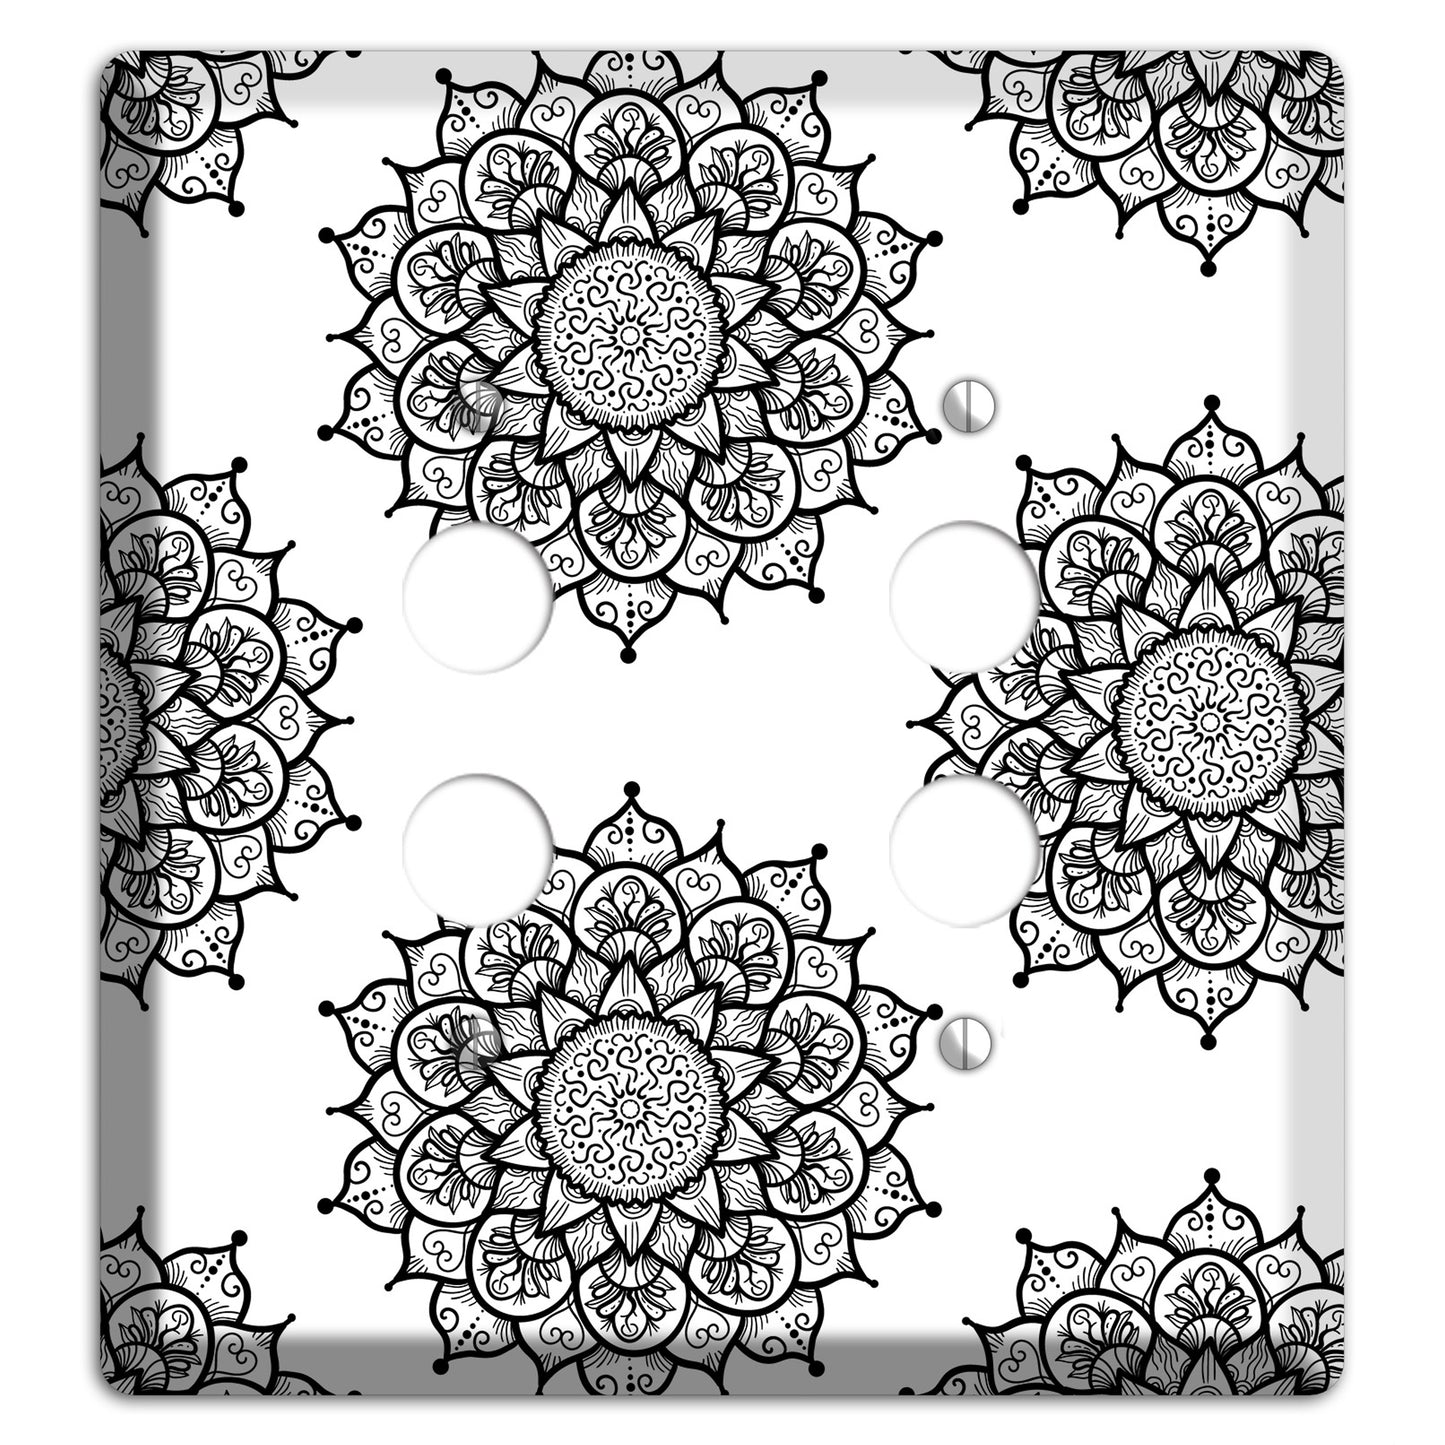 Mandala Black and White Style S Cover Plates 2 Pushbutton Wallplate